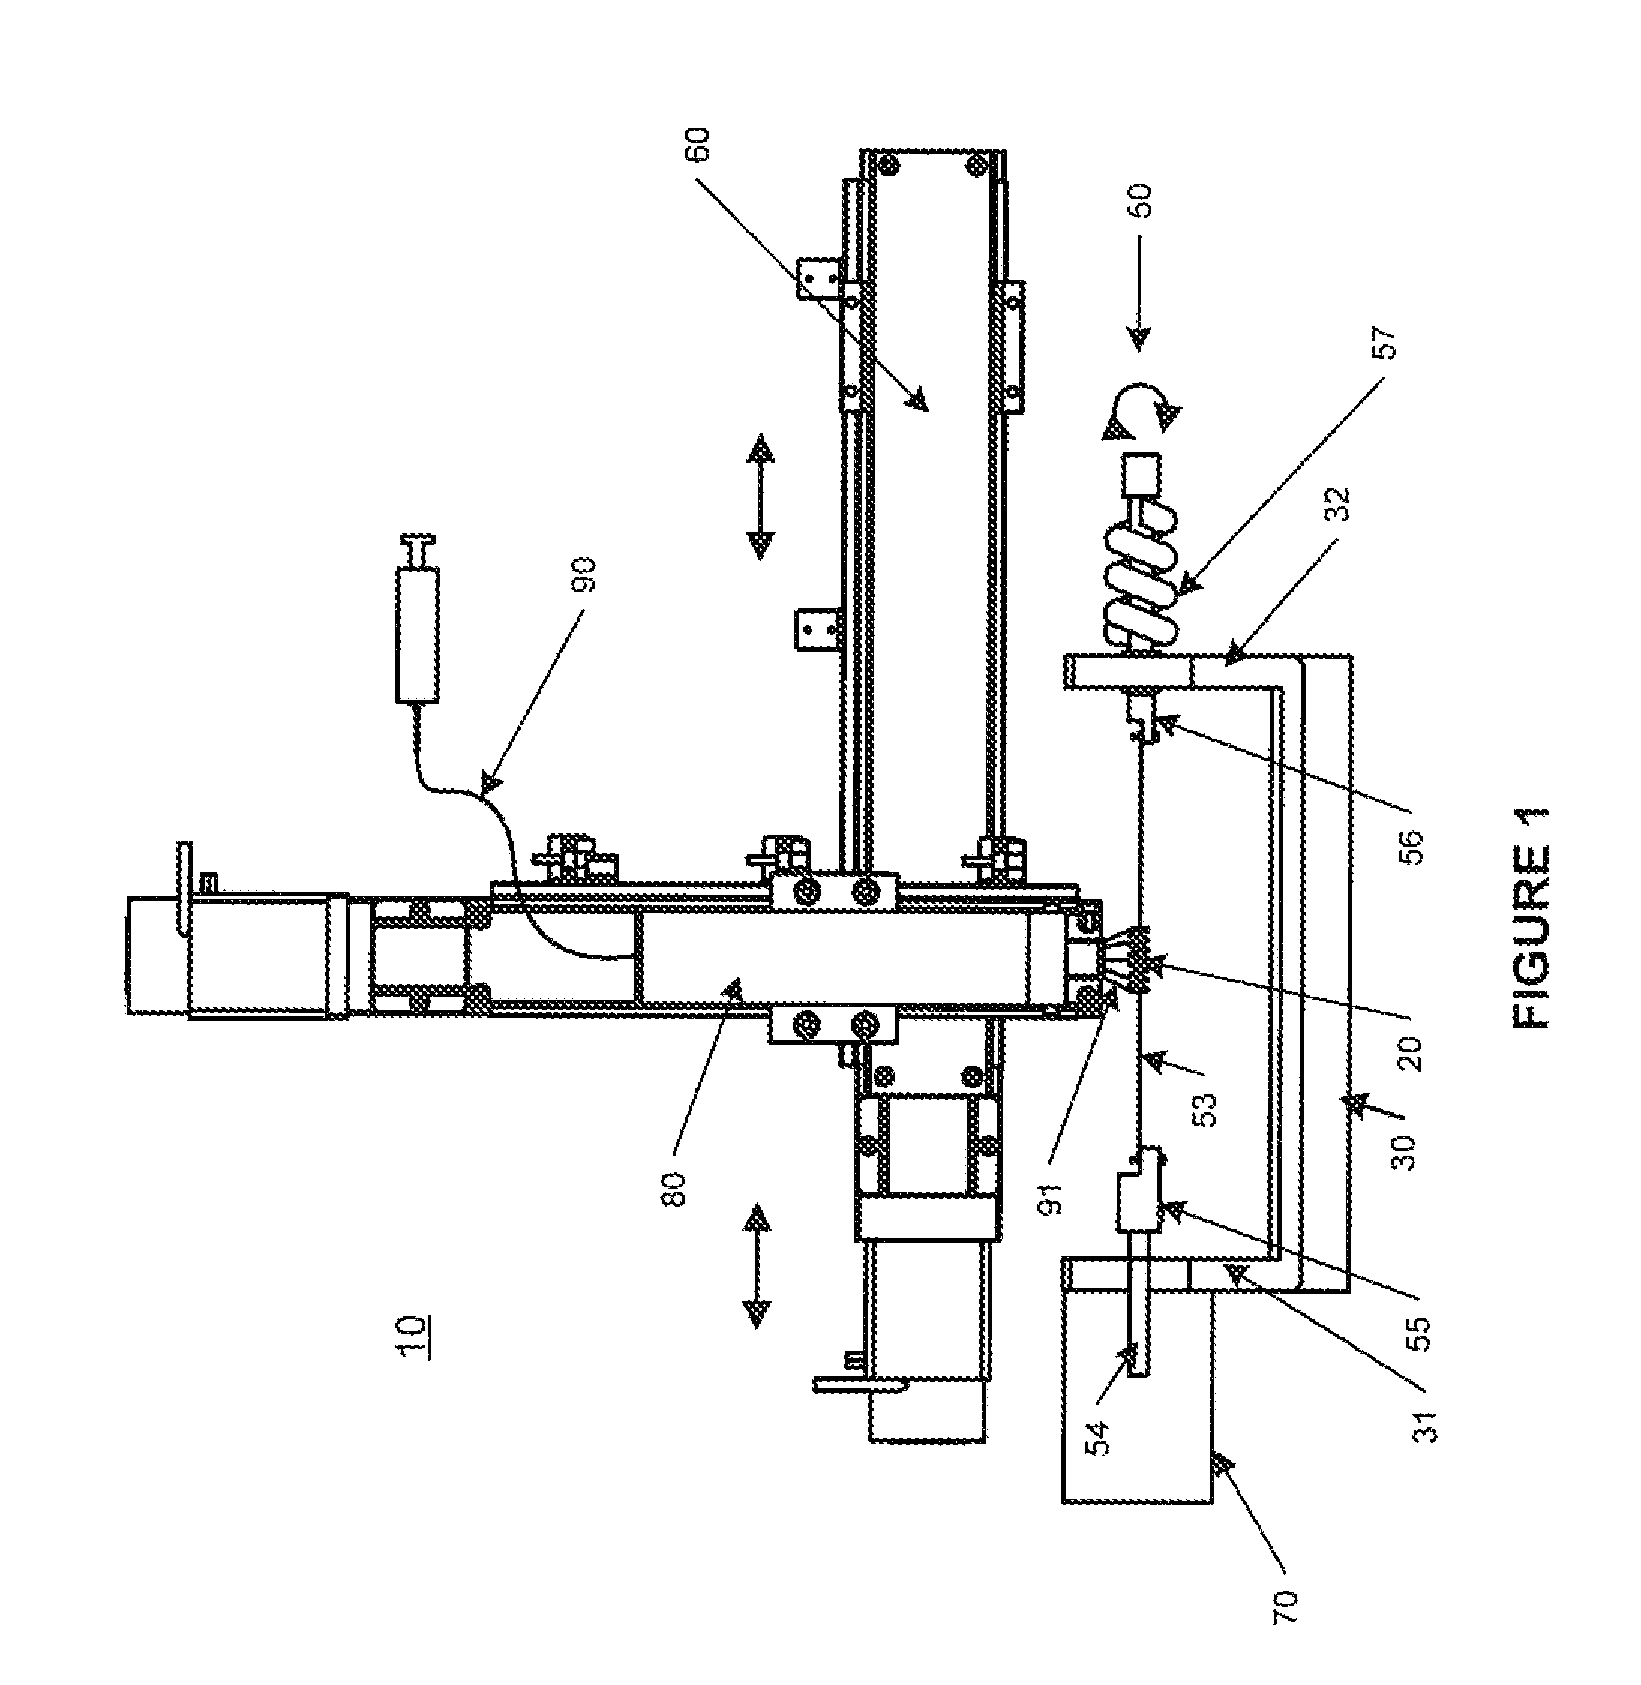 Apparatus for holding a medical device during coating